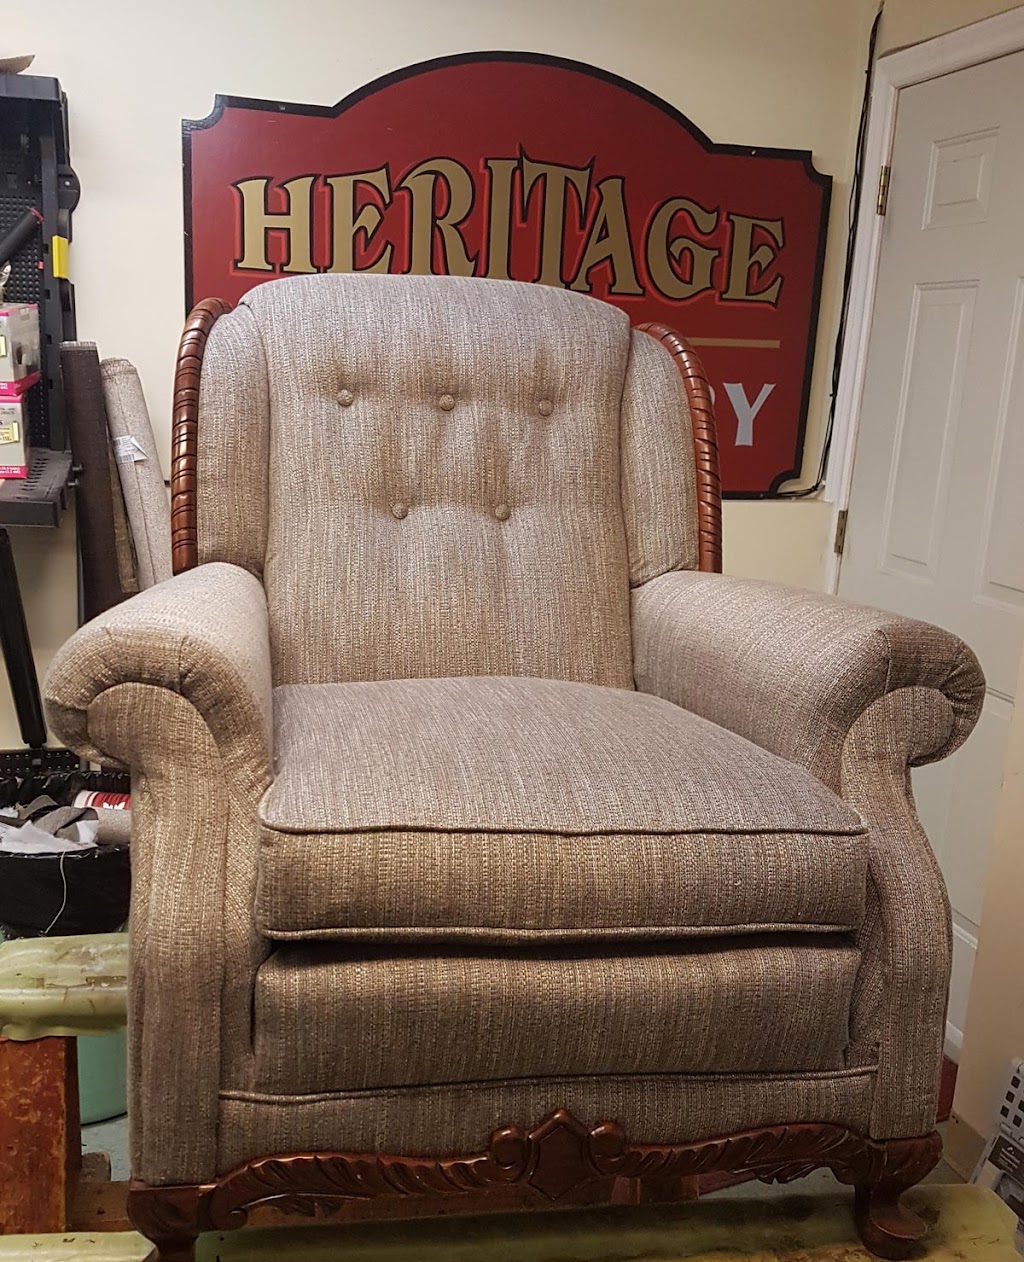 Heritage Upholstery | furniture store | 18 Country Crescent, Quispamsis, NB E2E 1T1, Canada | 5068498008 OR +1 506-849-8008